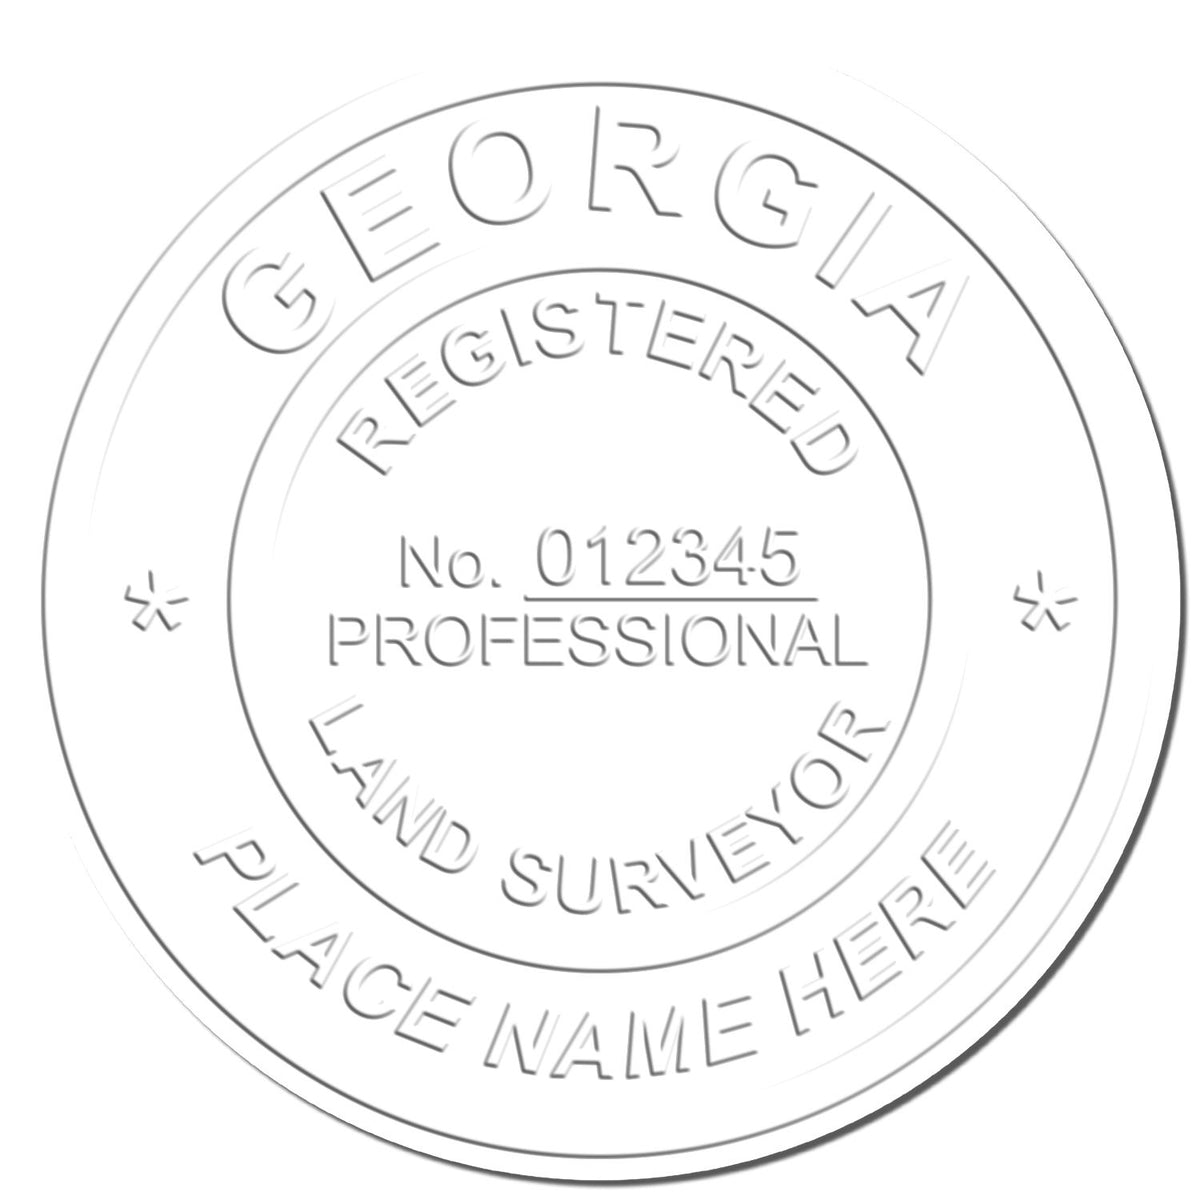 This paper is stamped with a sample imprint of the Hybrid Georgia Land Surveyor Seal, signifying its quality and reliability.